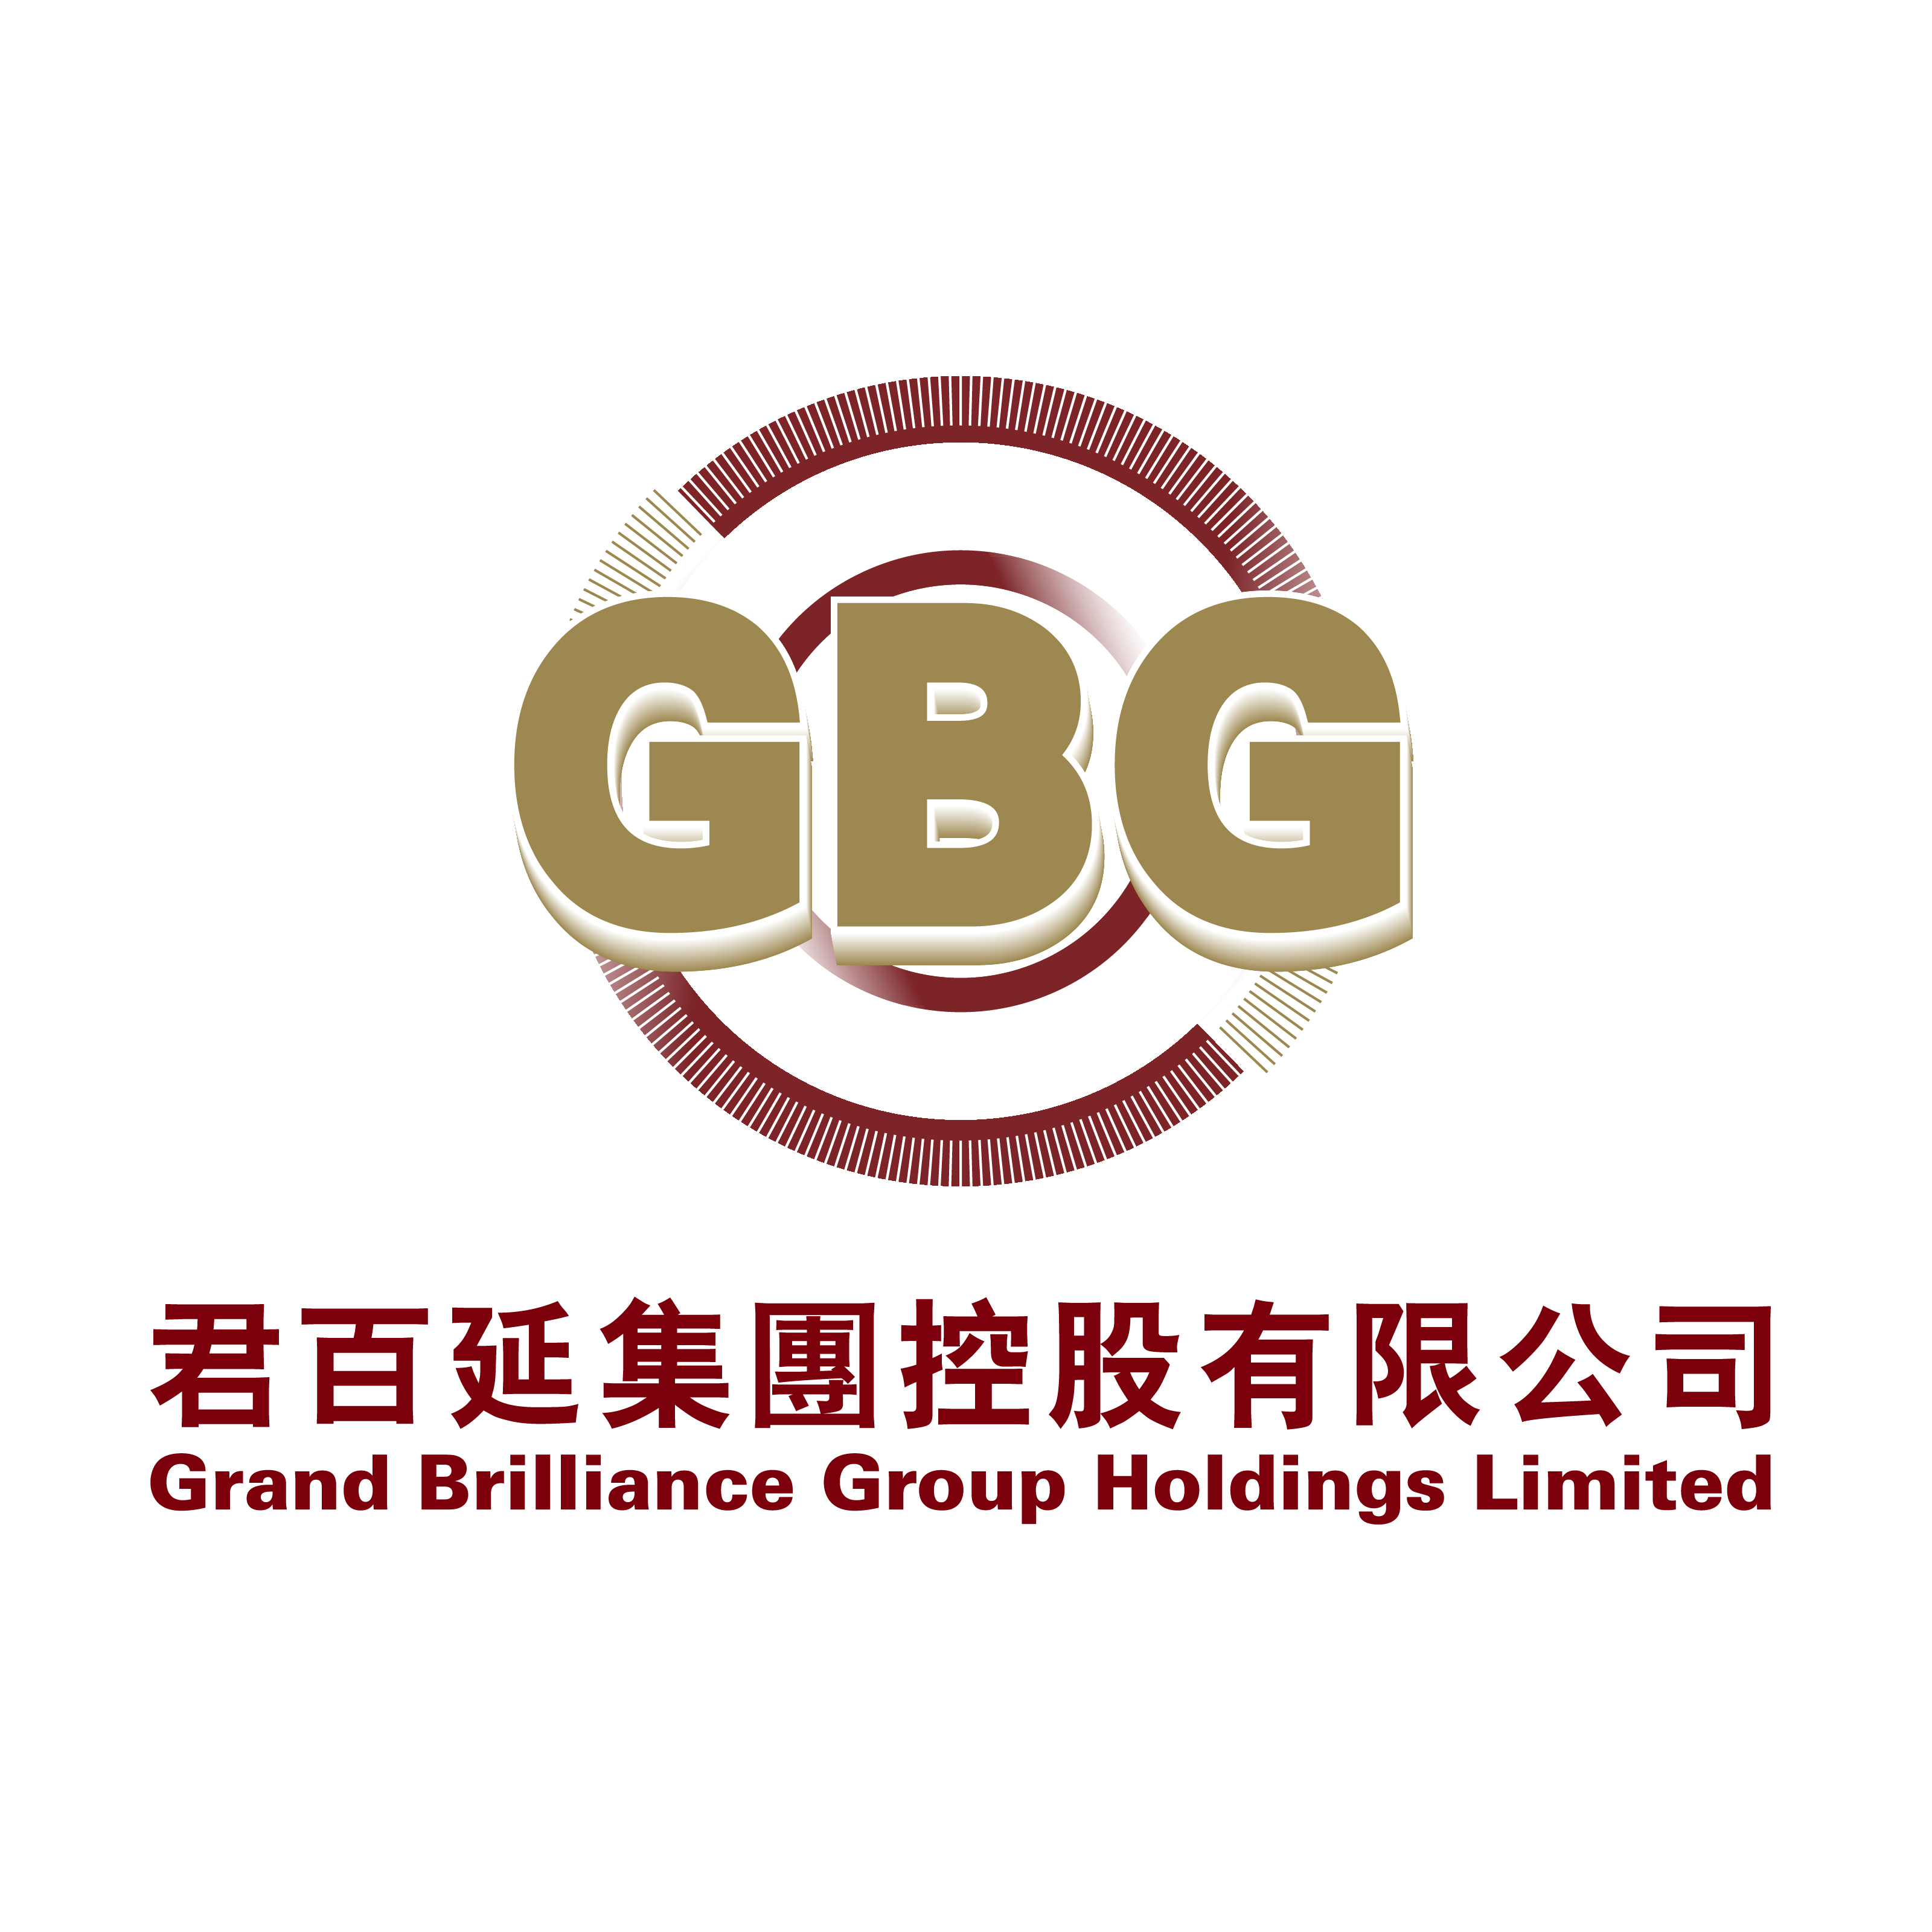 Grand Brilliance Group Holdings Limited